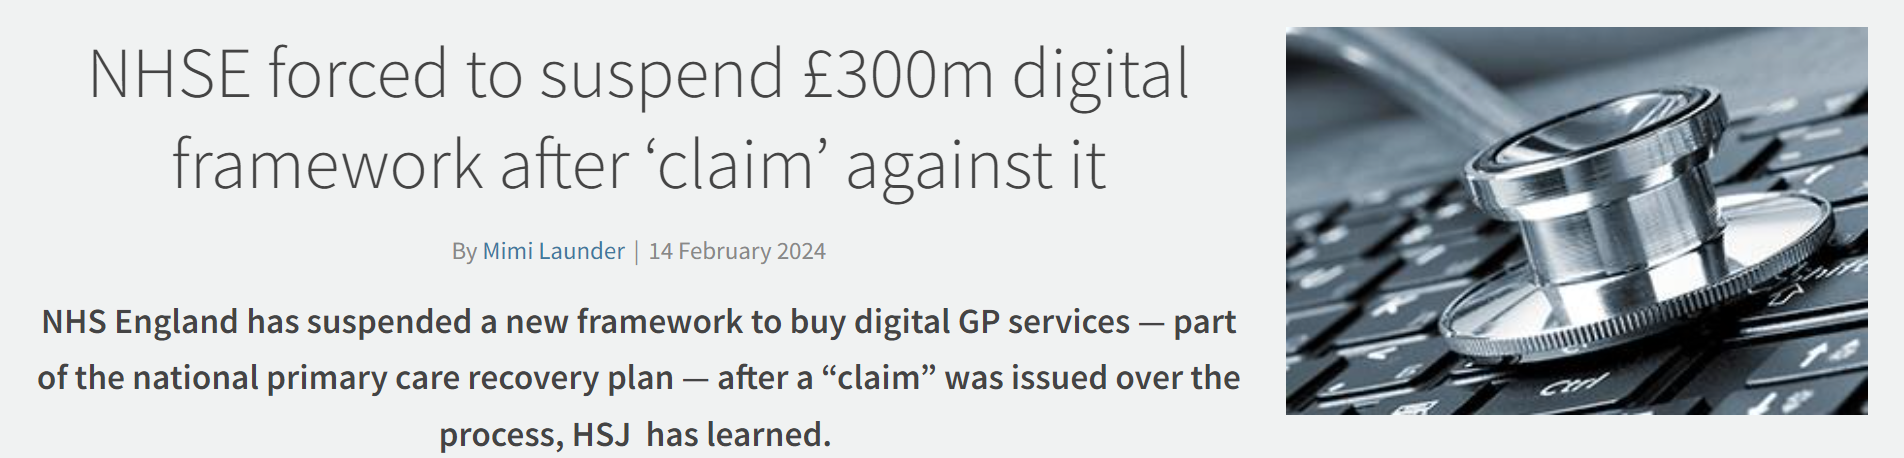 NHSE forced to suspend £300m Digital framework after a claim against it.